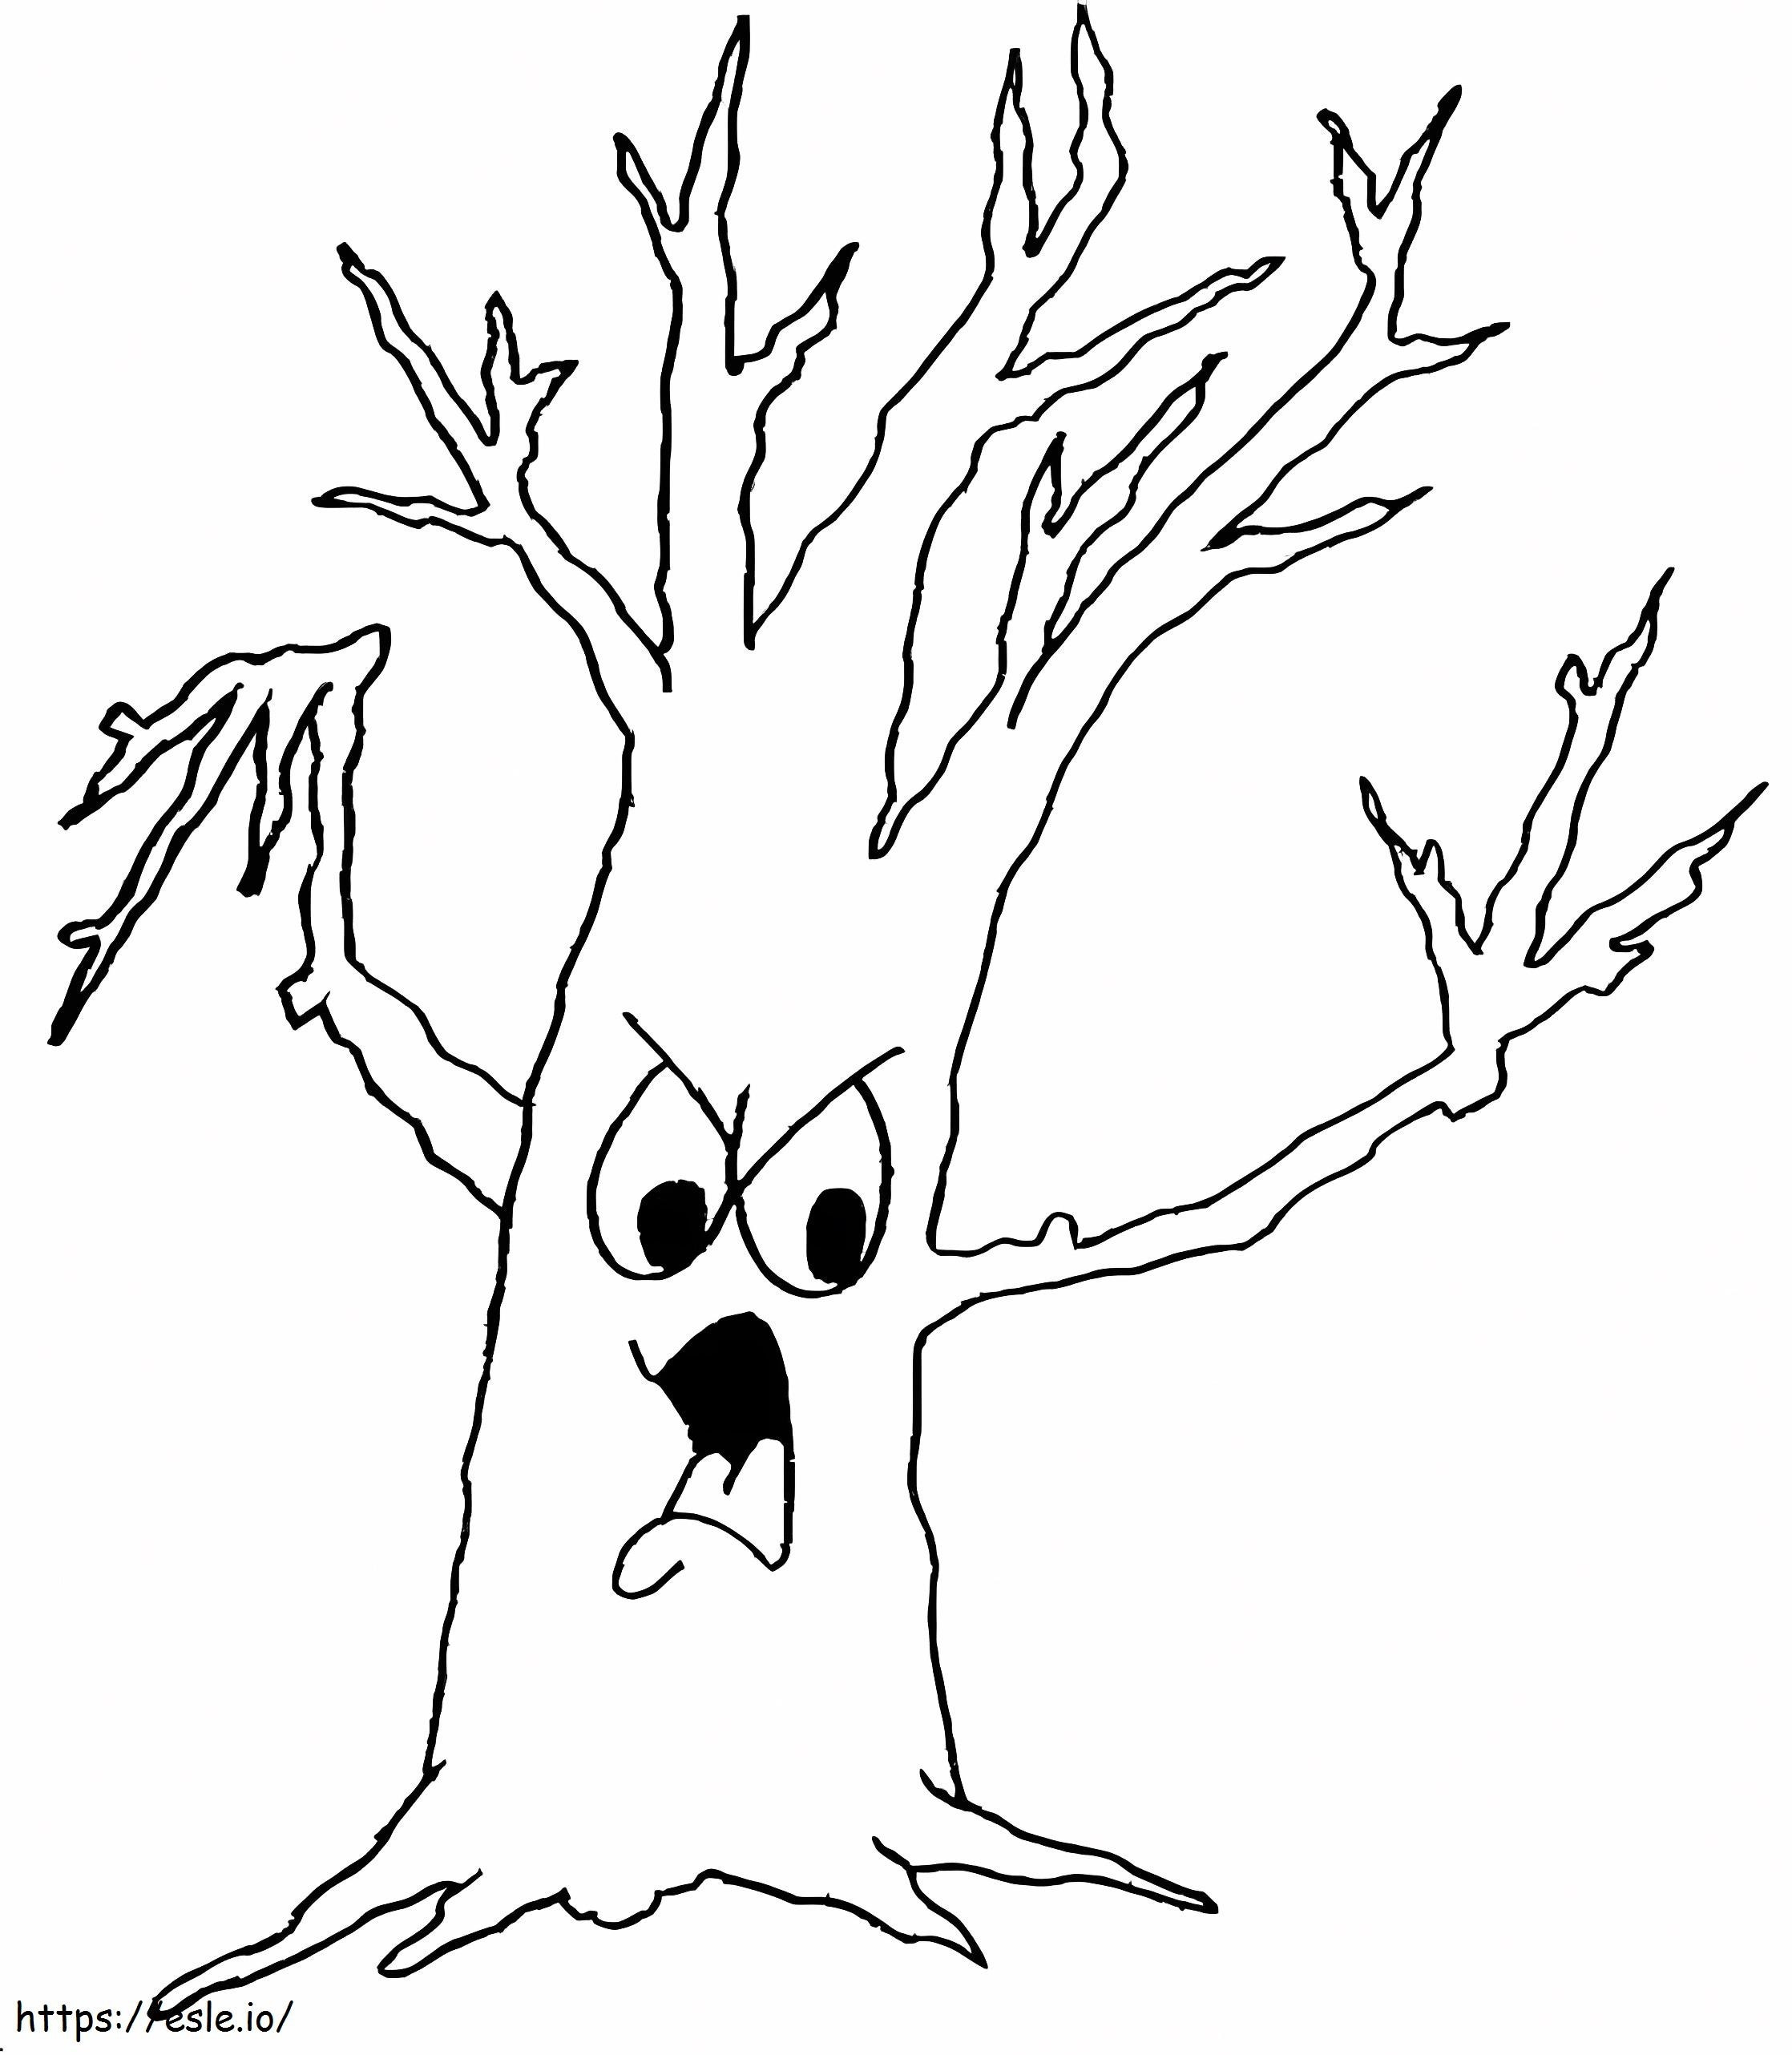 Printable Spooky Tree coloring page